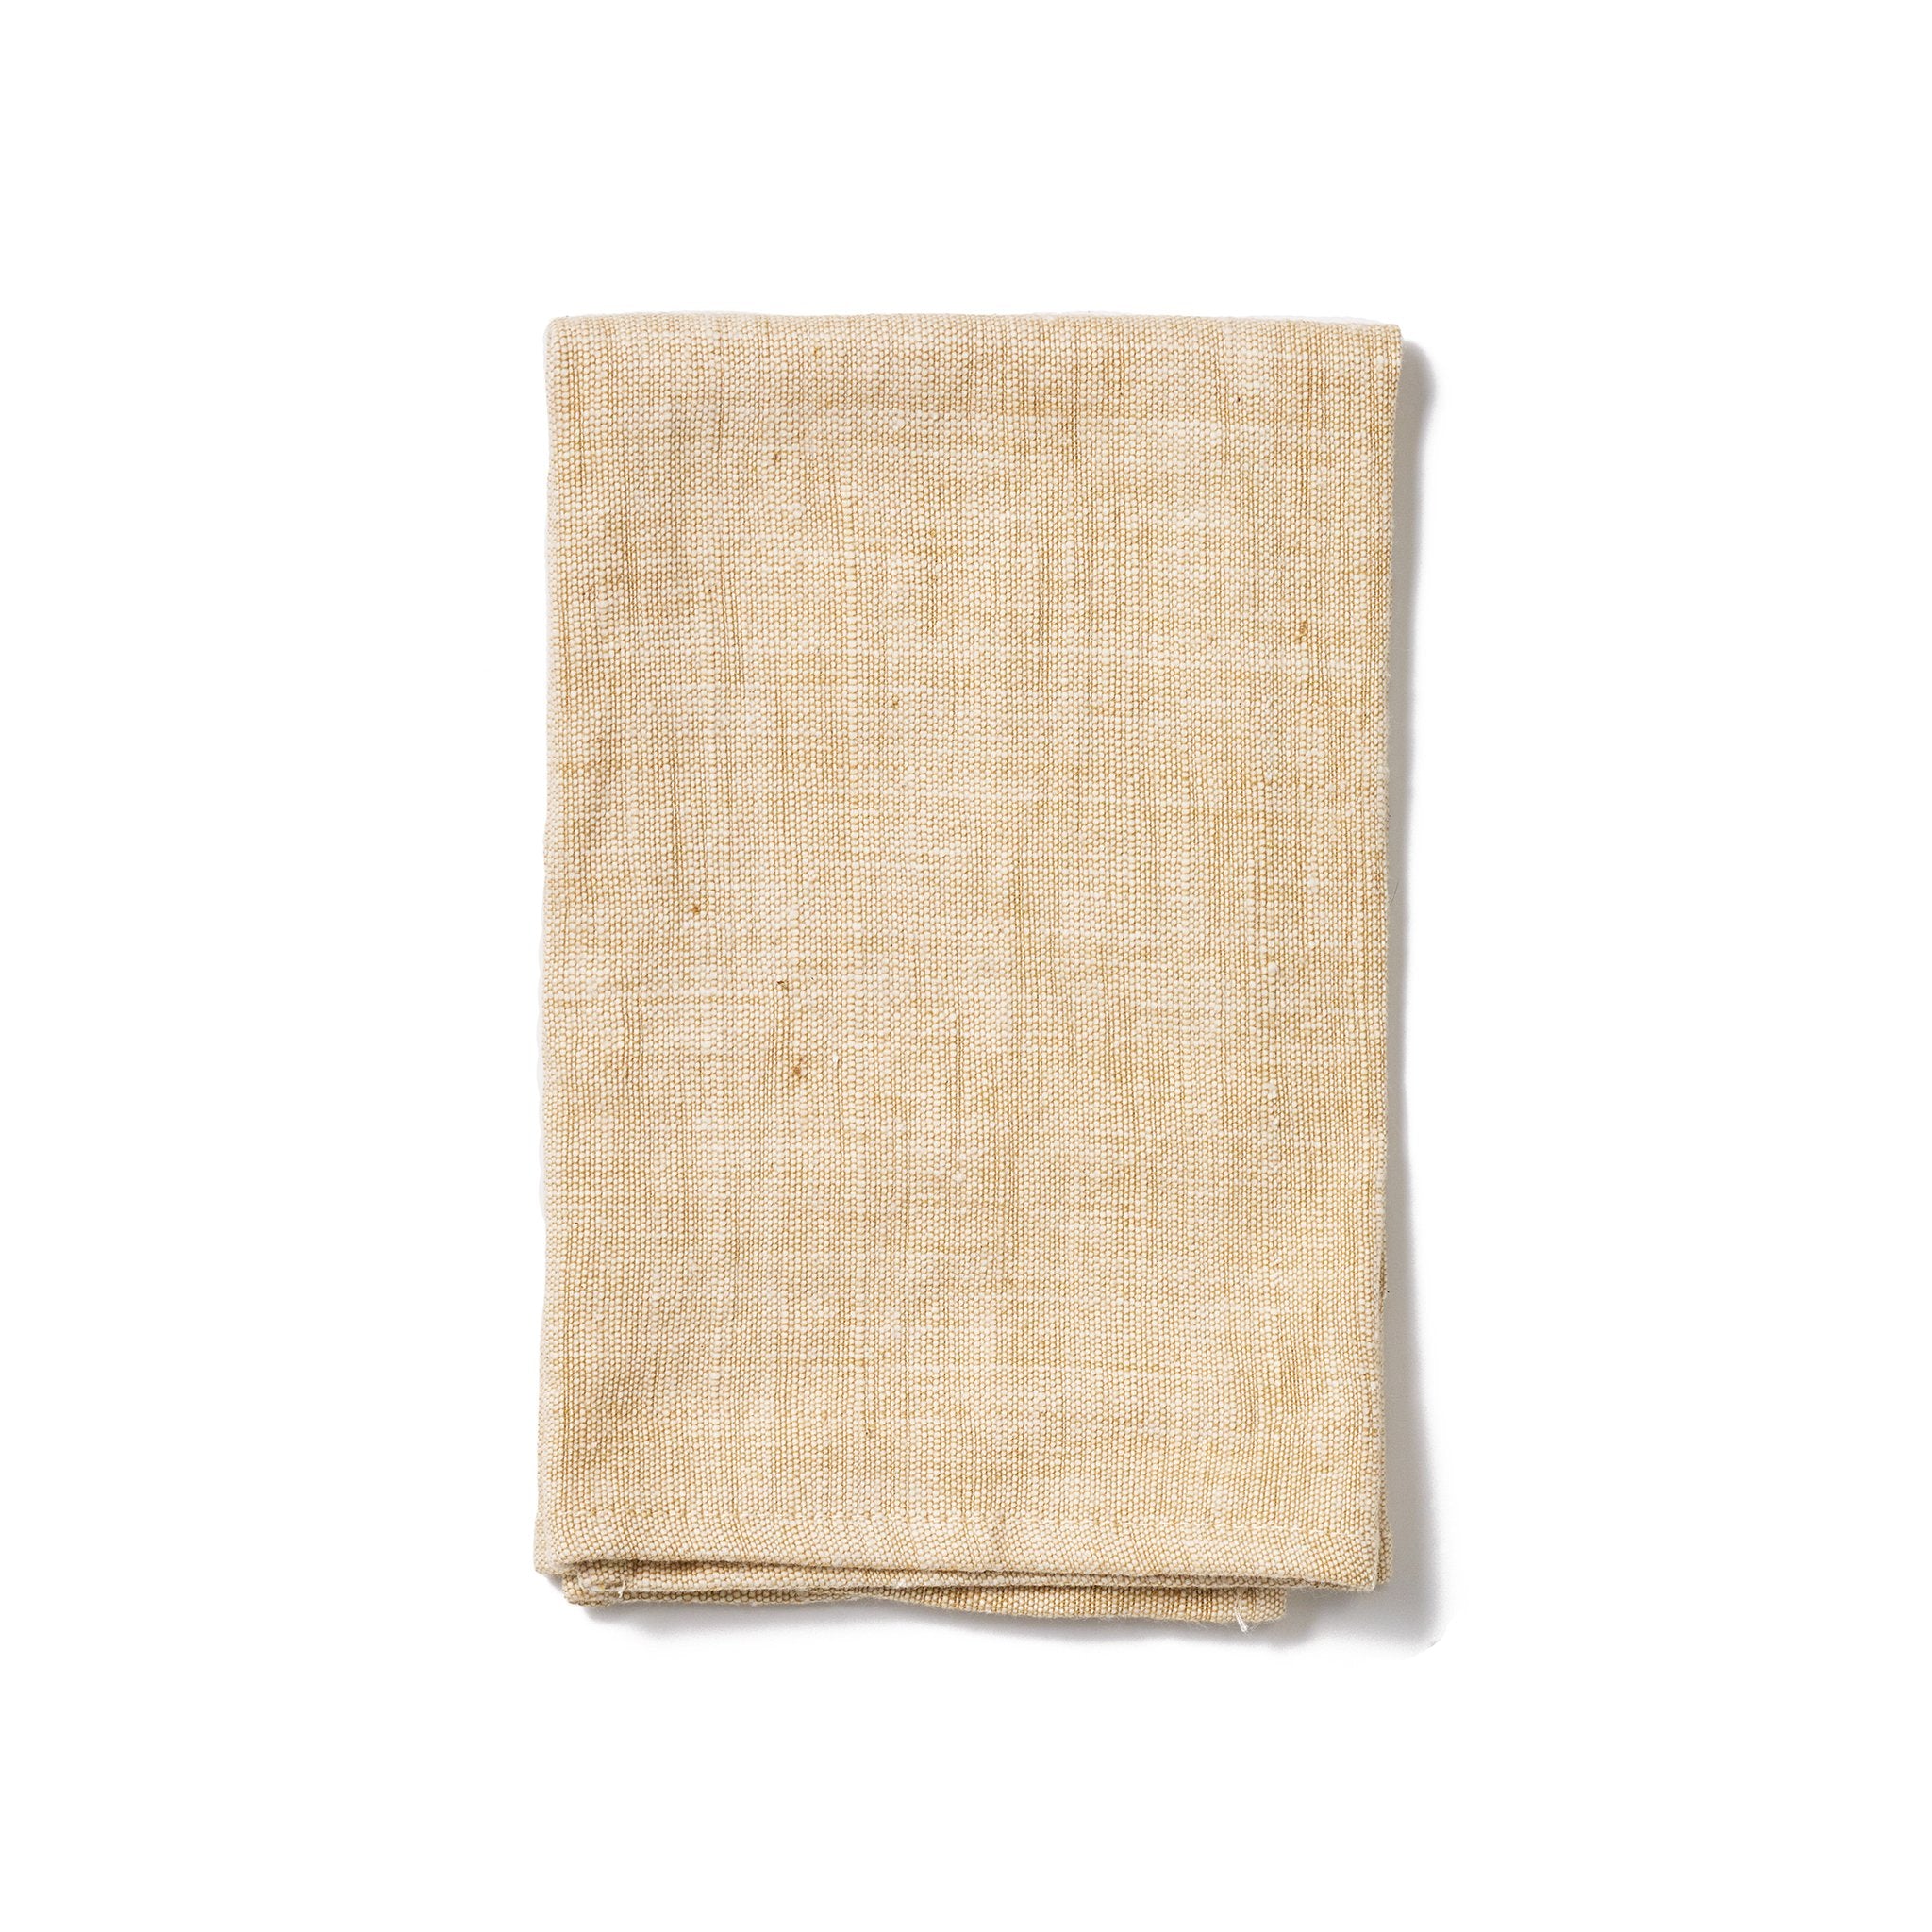 Simple yet chic napkins in a navy washed fabric made from 100% hand-loomed Ethiopian cotton.